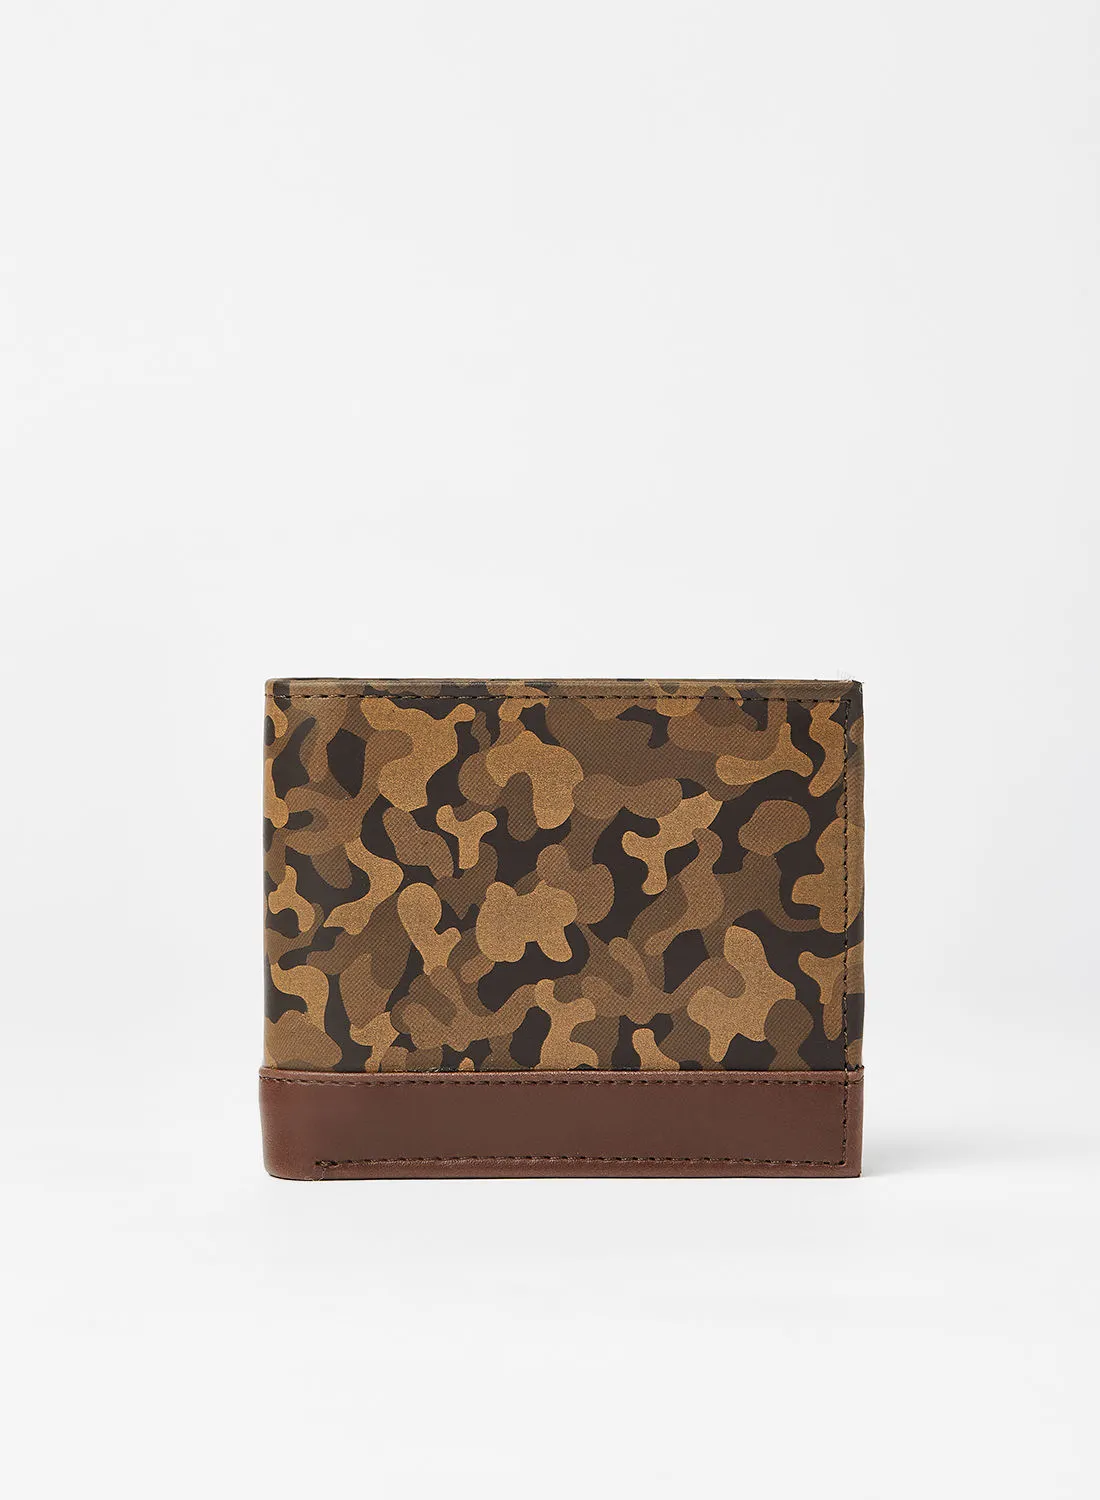 STATE 8 Camouflage Print Wallet Brown